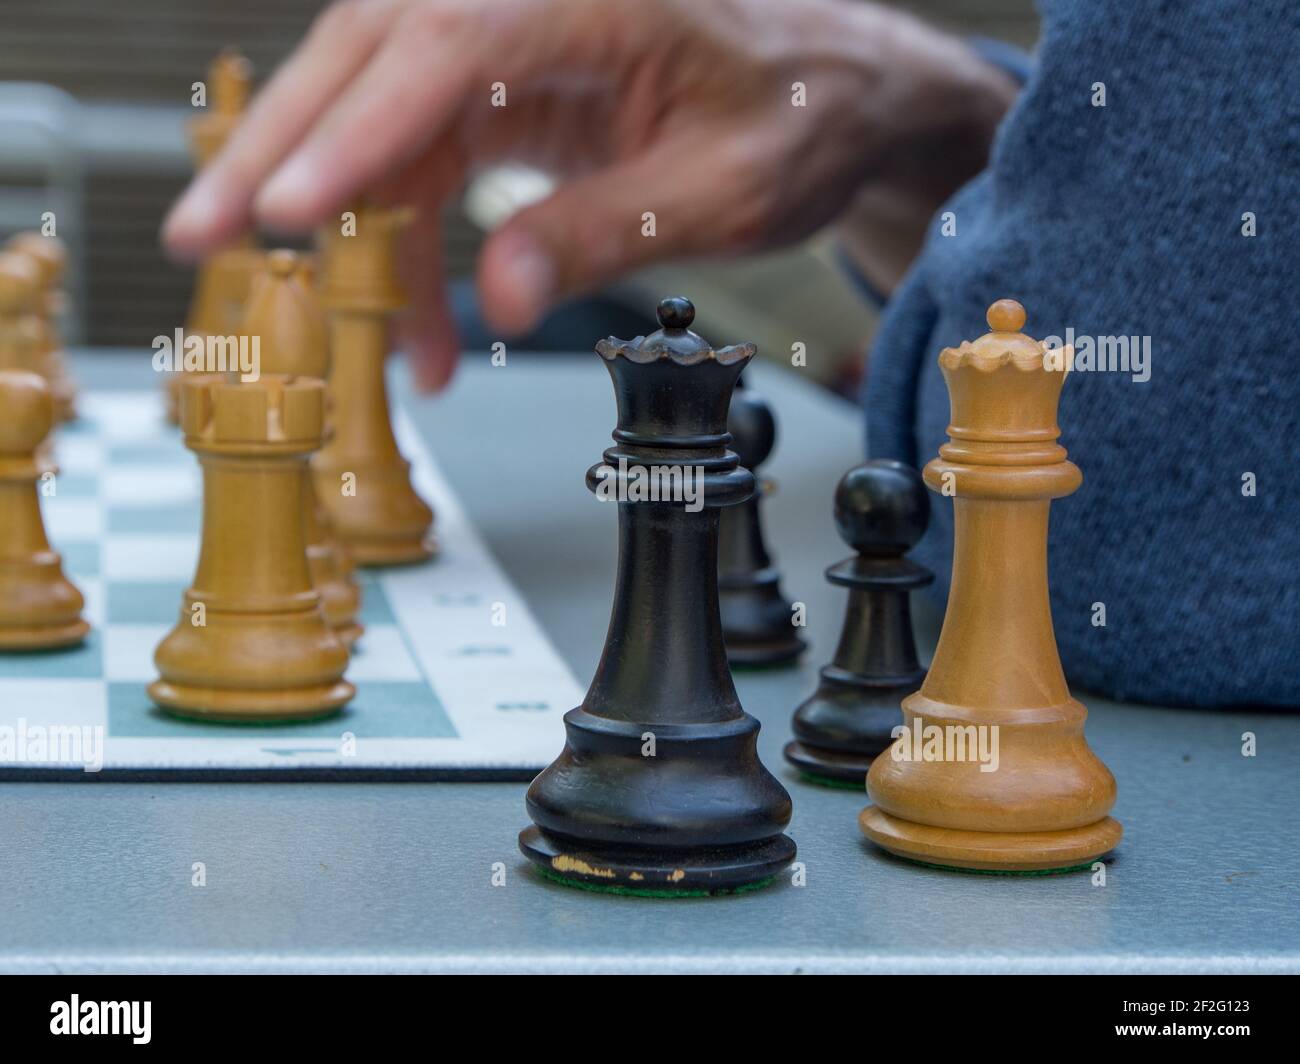 Man's hand on chess piece with other chess playing pieces sitting off the board on a table. Close up. Stock Photo